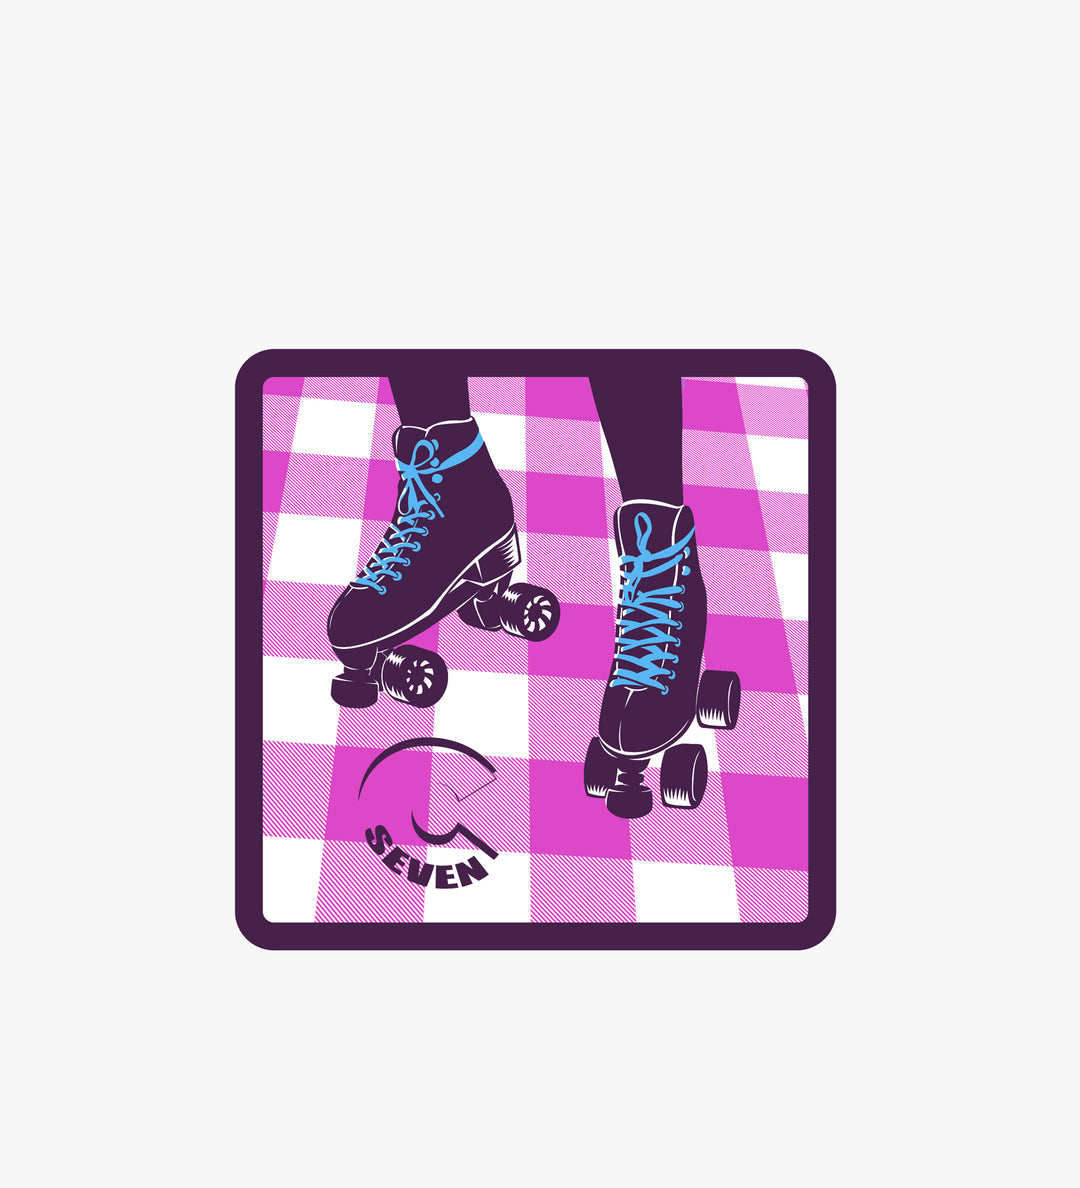 C7skates Roll With It decorative sticker with pink and grape details: 3 x 3-inches in a matte finish print. 